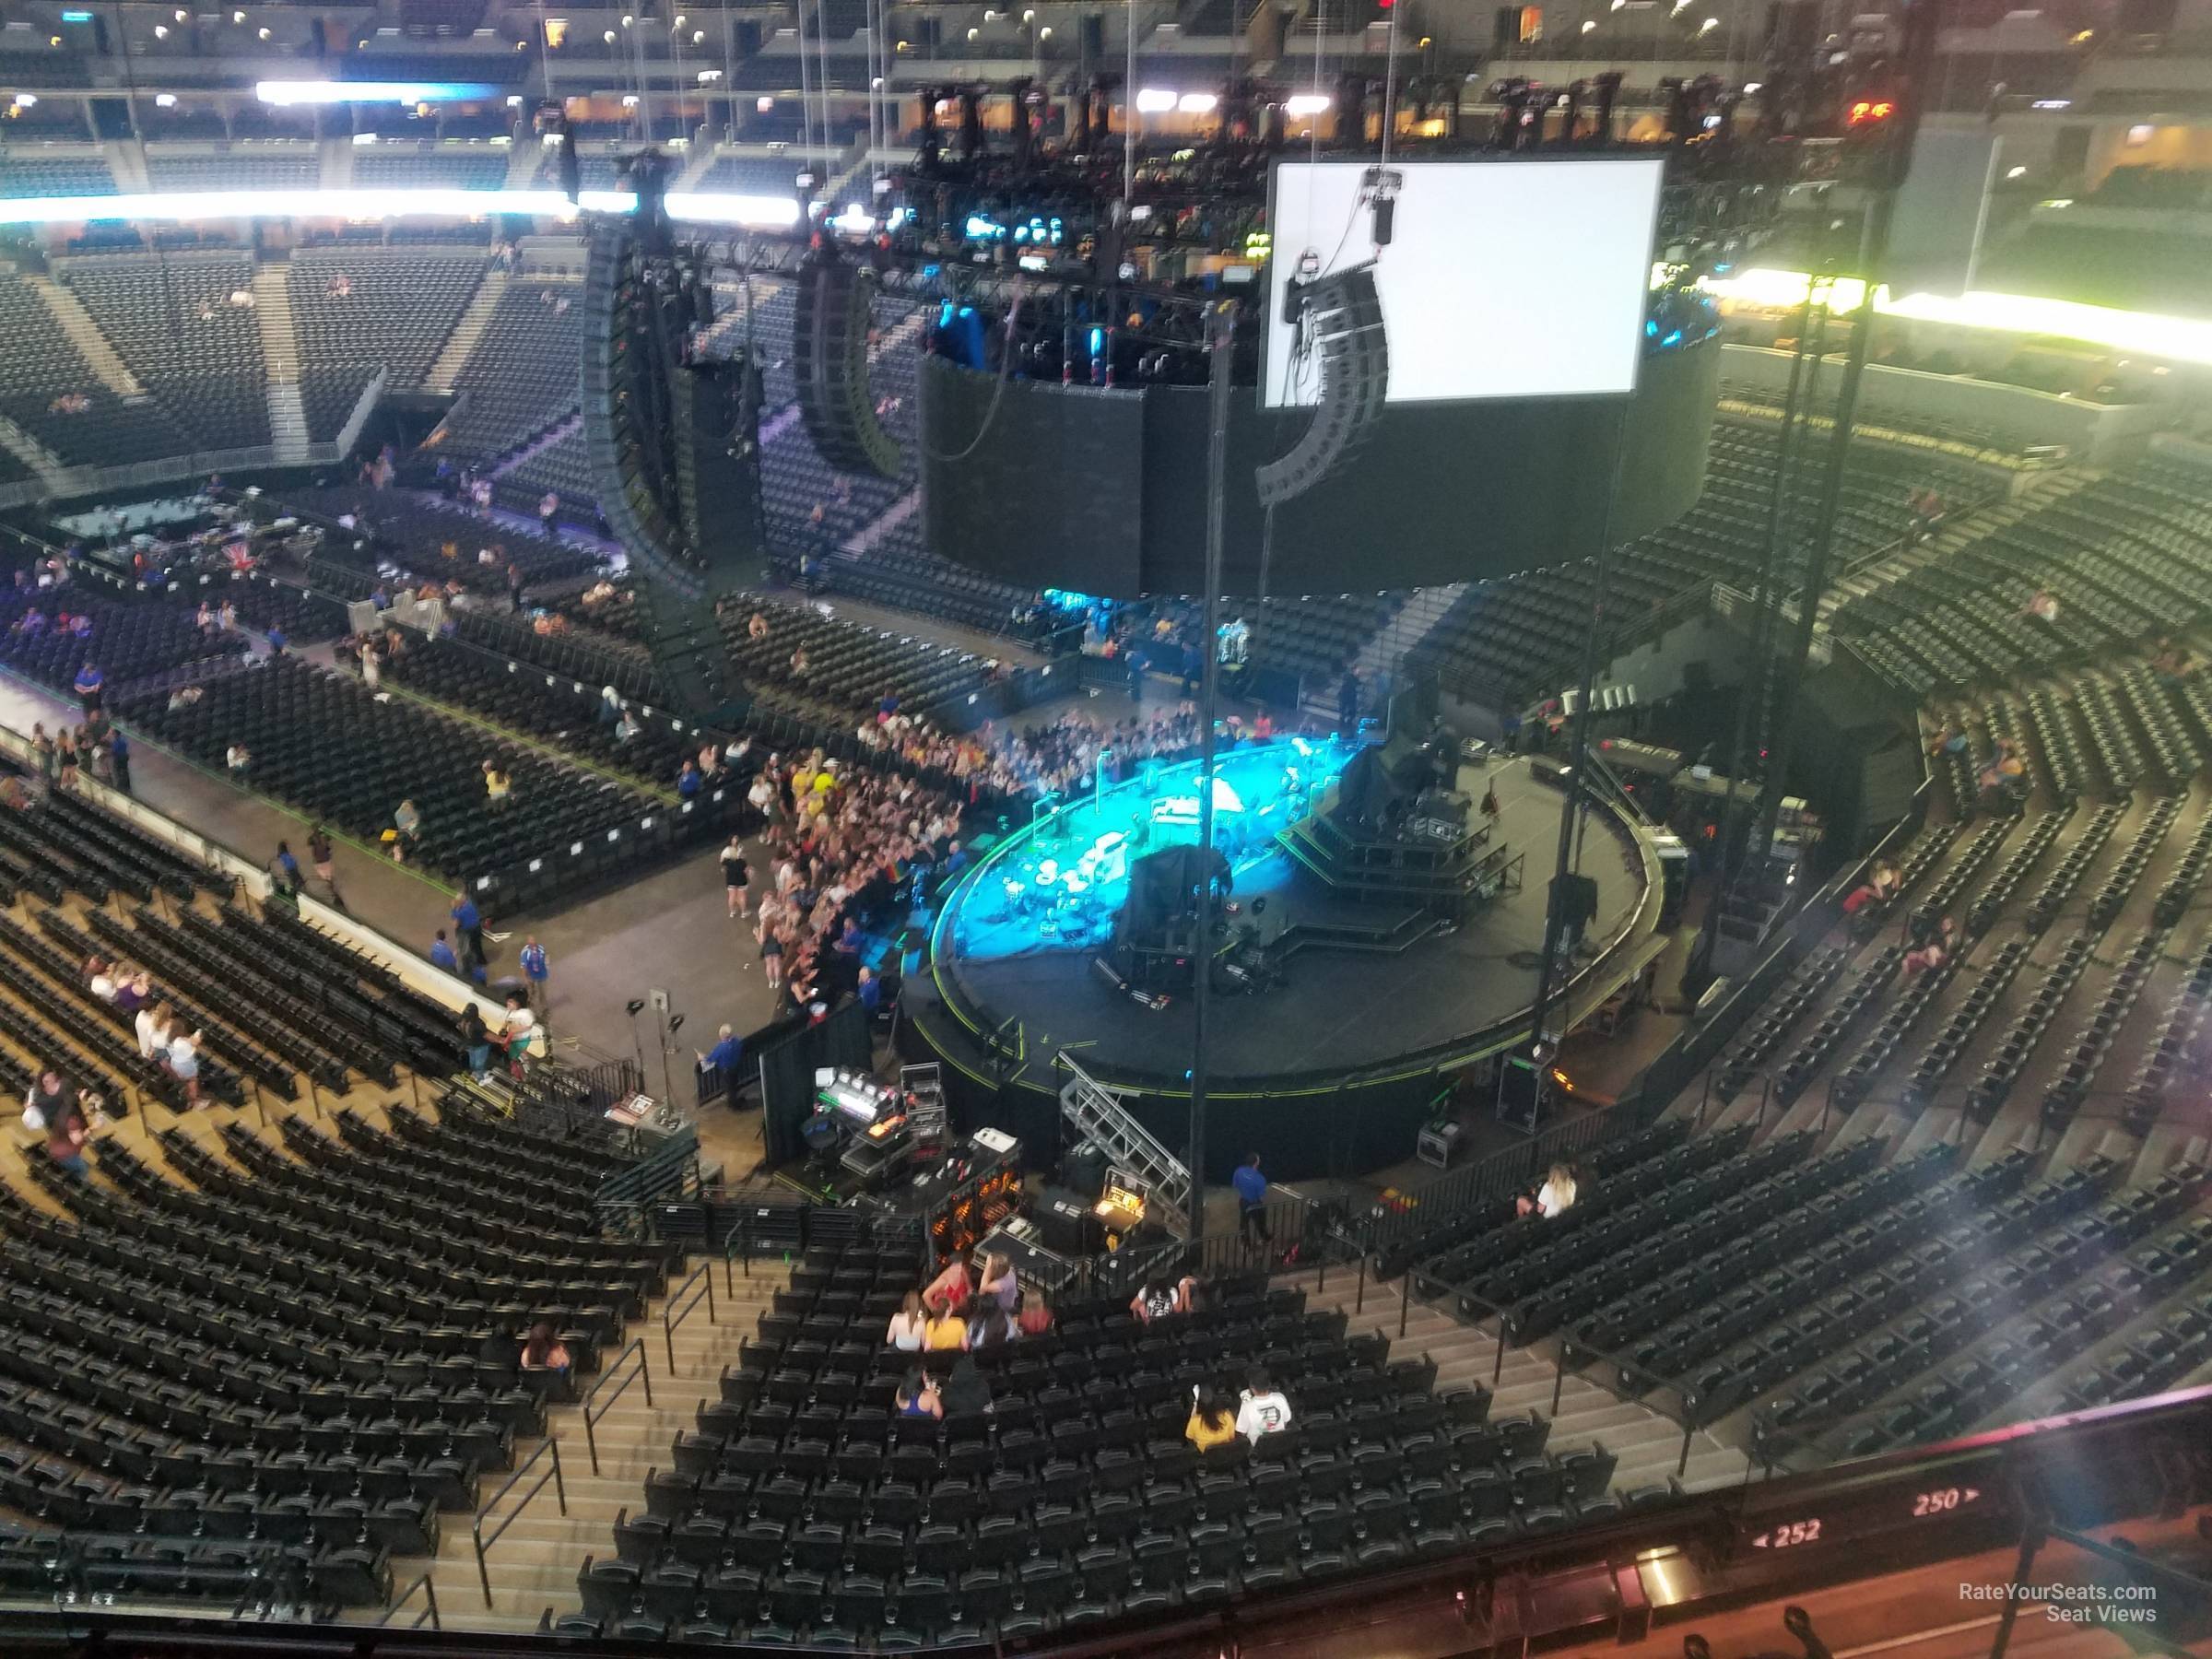 Section 369 at Pepsi Center for Concerts